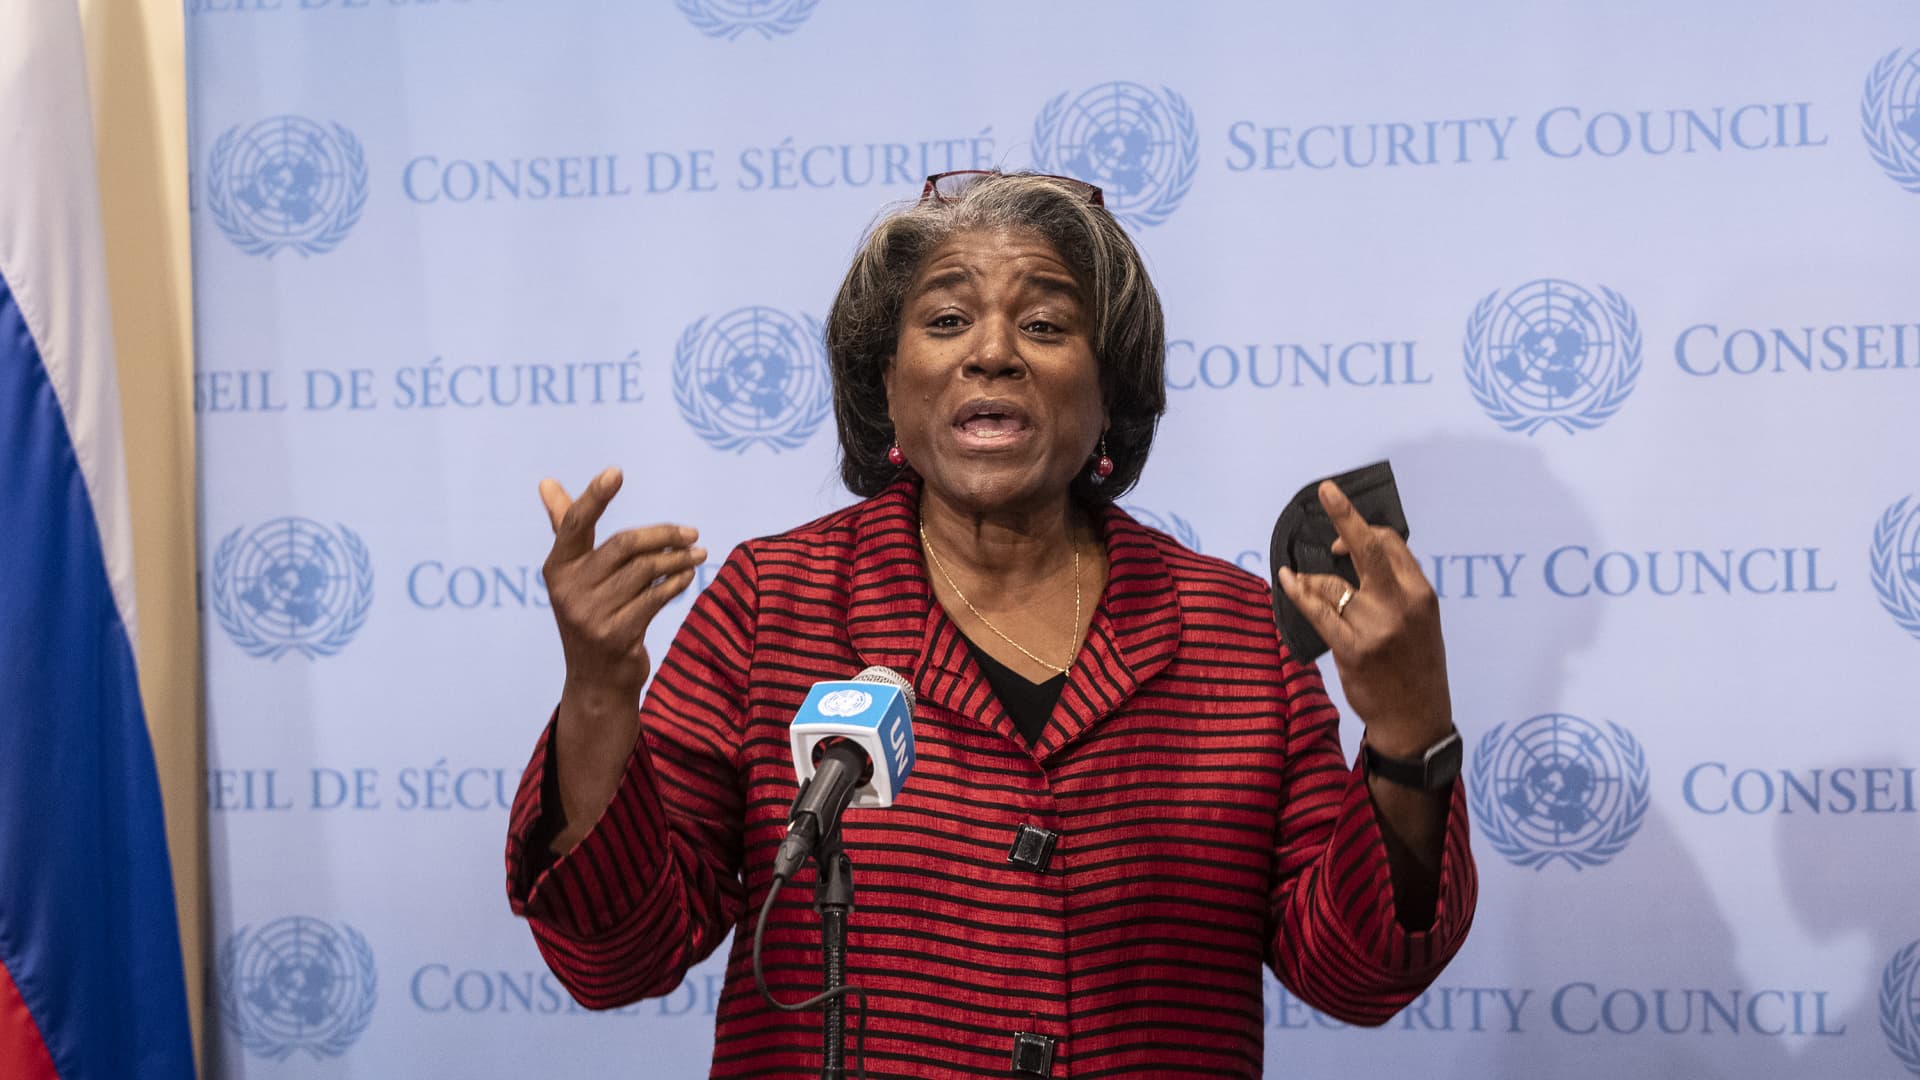 US Ambassador Linda Thomas-Greenfield makes a statement at a stakeout at the Security Council at UN Headquarters. Meeting was convened at the request of the Russian Federation who accused Ukraine of developing biological weapons under the tutelage of the United States without providing any evidence.